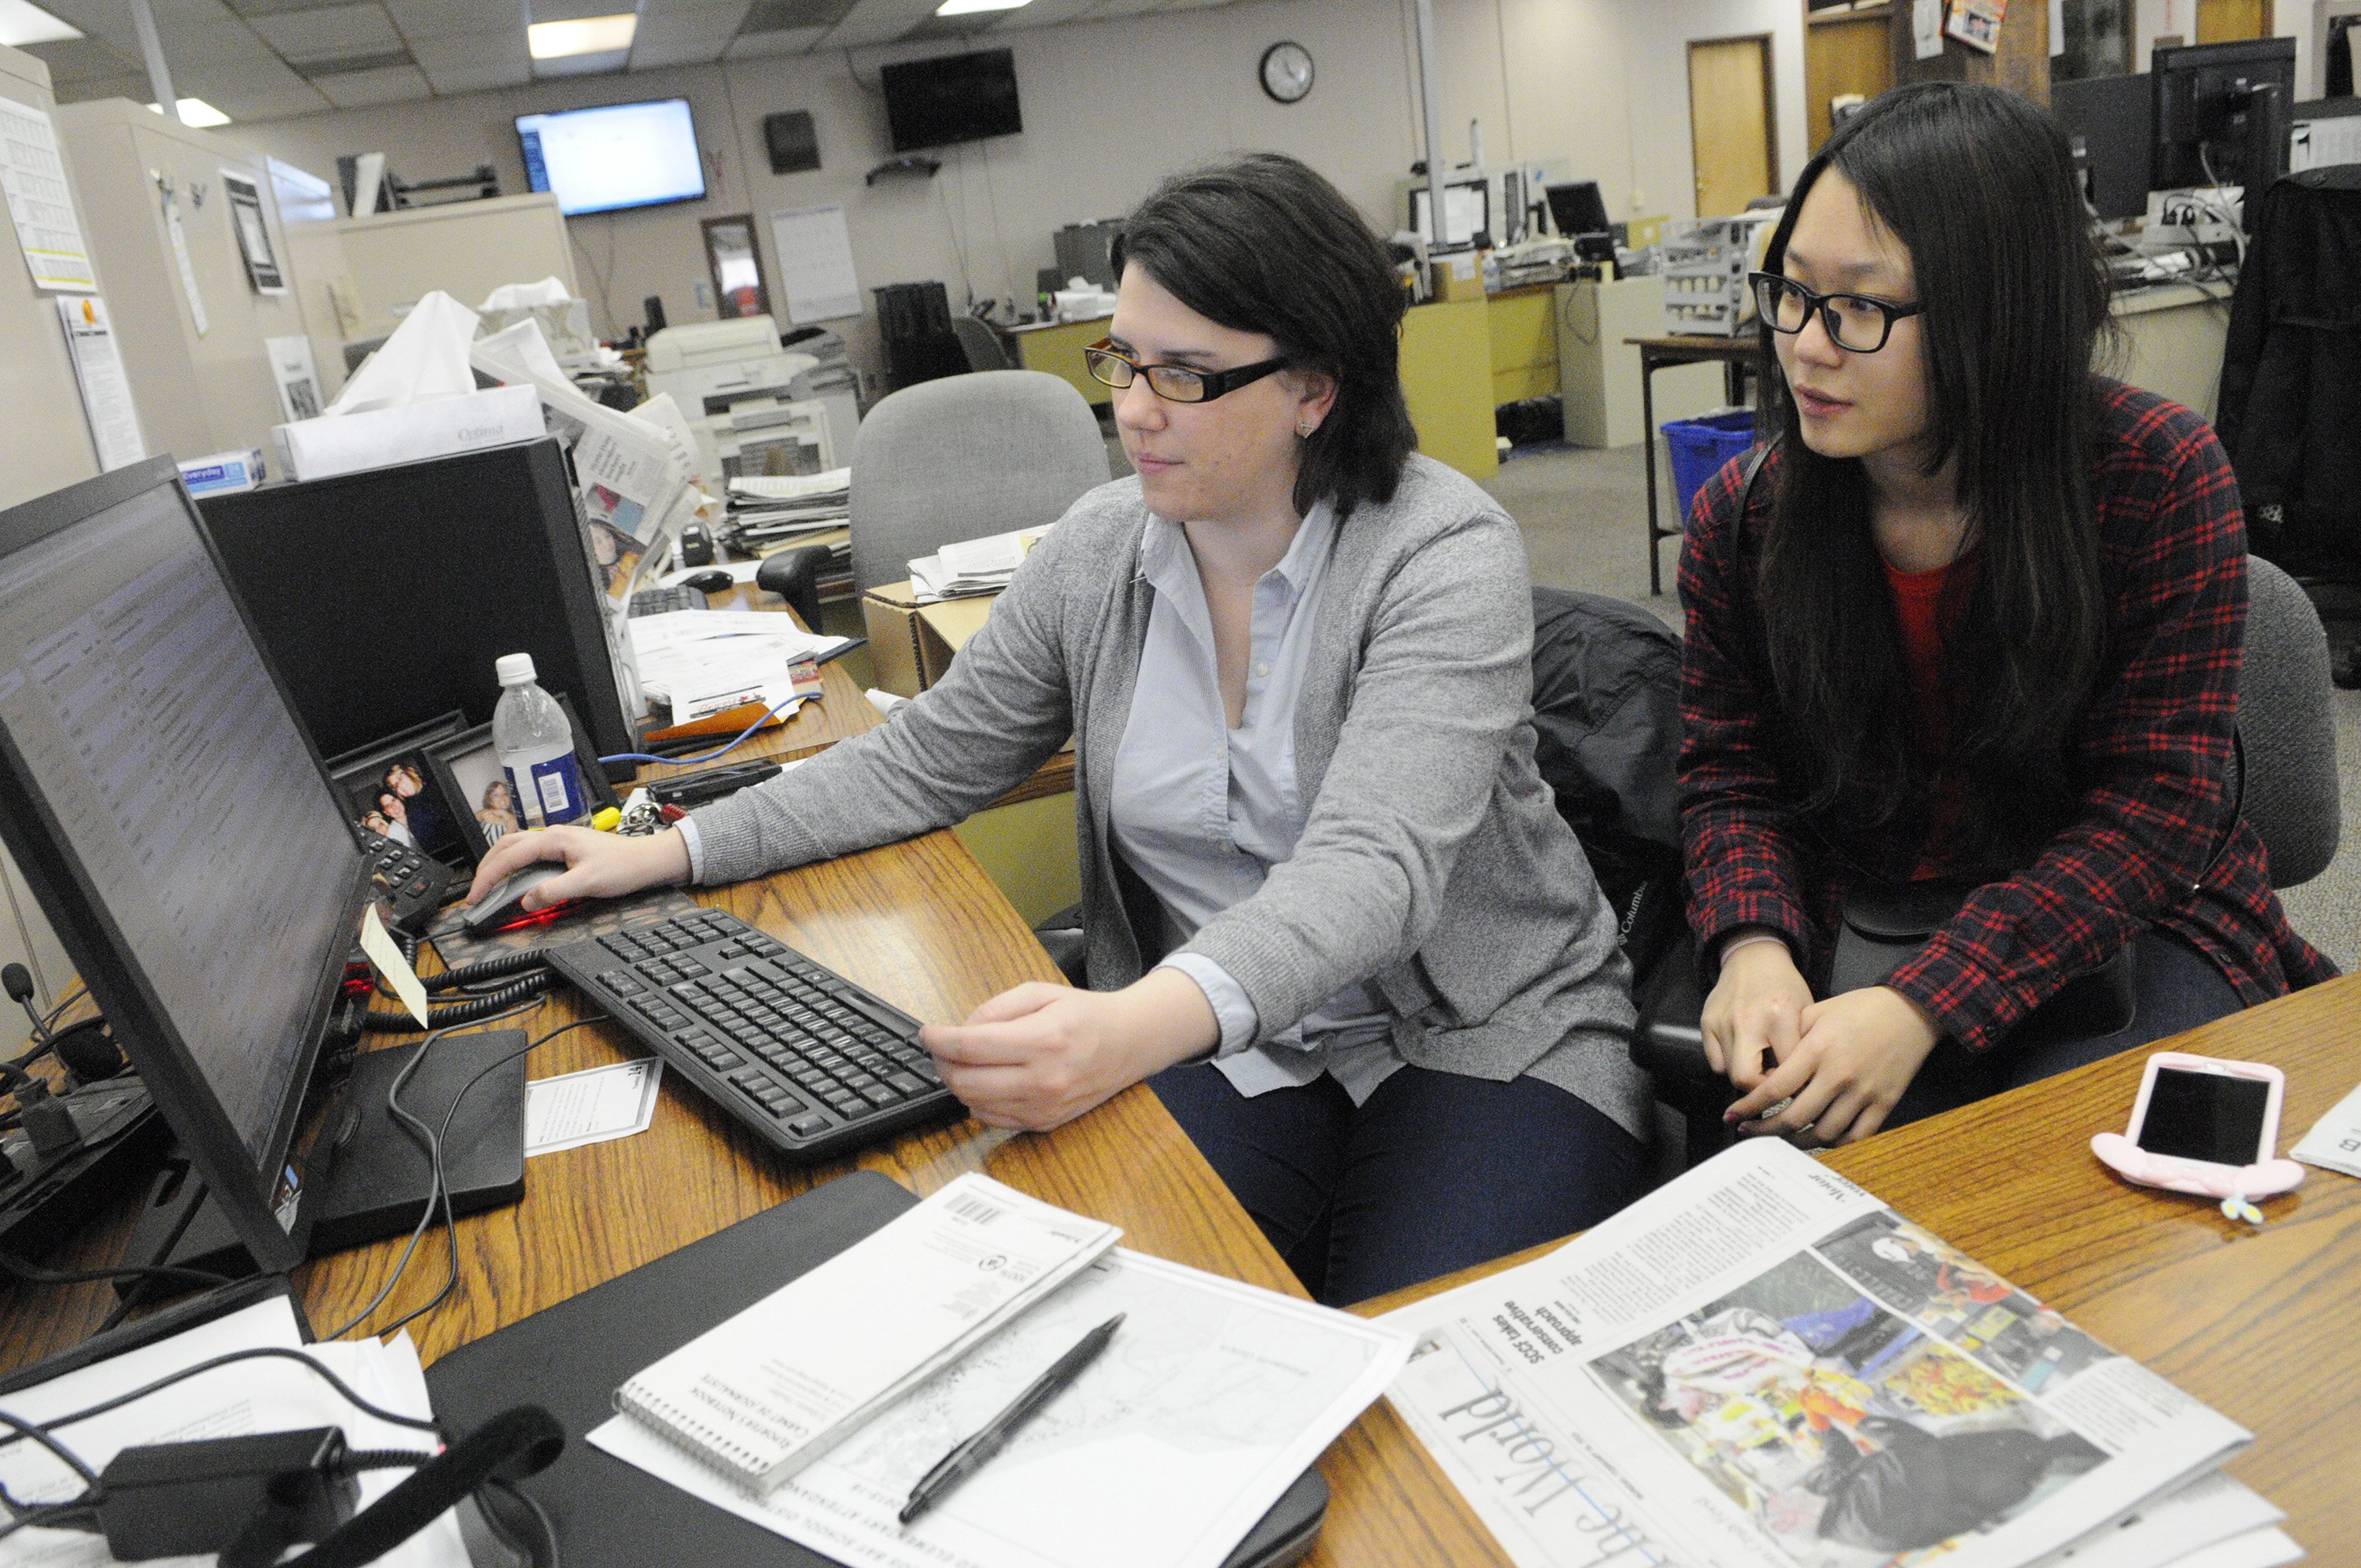 Chelsea Davis, ’12, digital editor at The World newspaper in Coos Bay, Ore., works with a Chinese exchange student during a half-day job shadow. Courtesy of Chelsea Davis